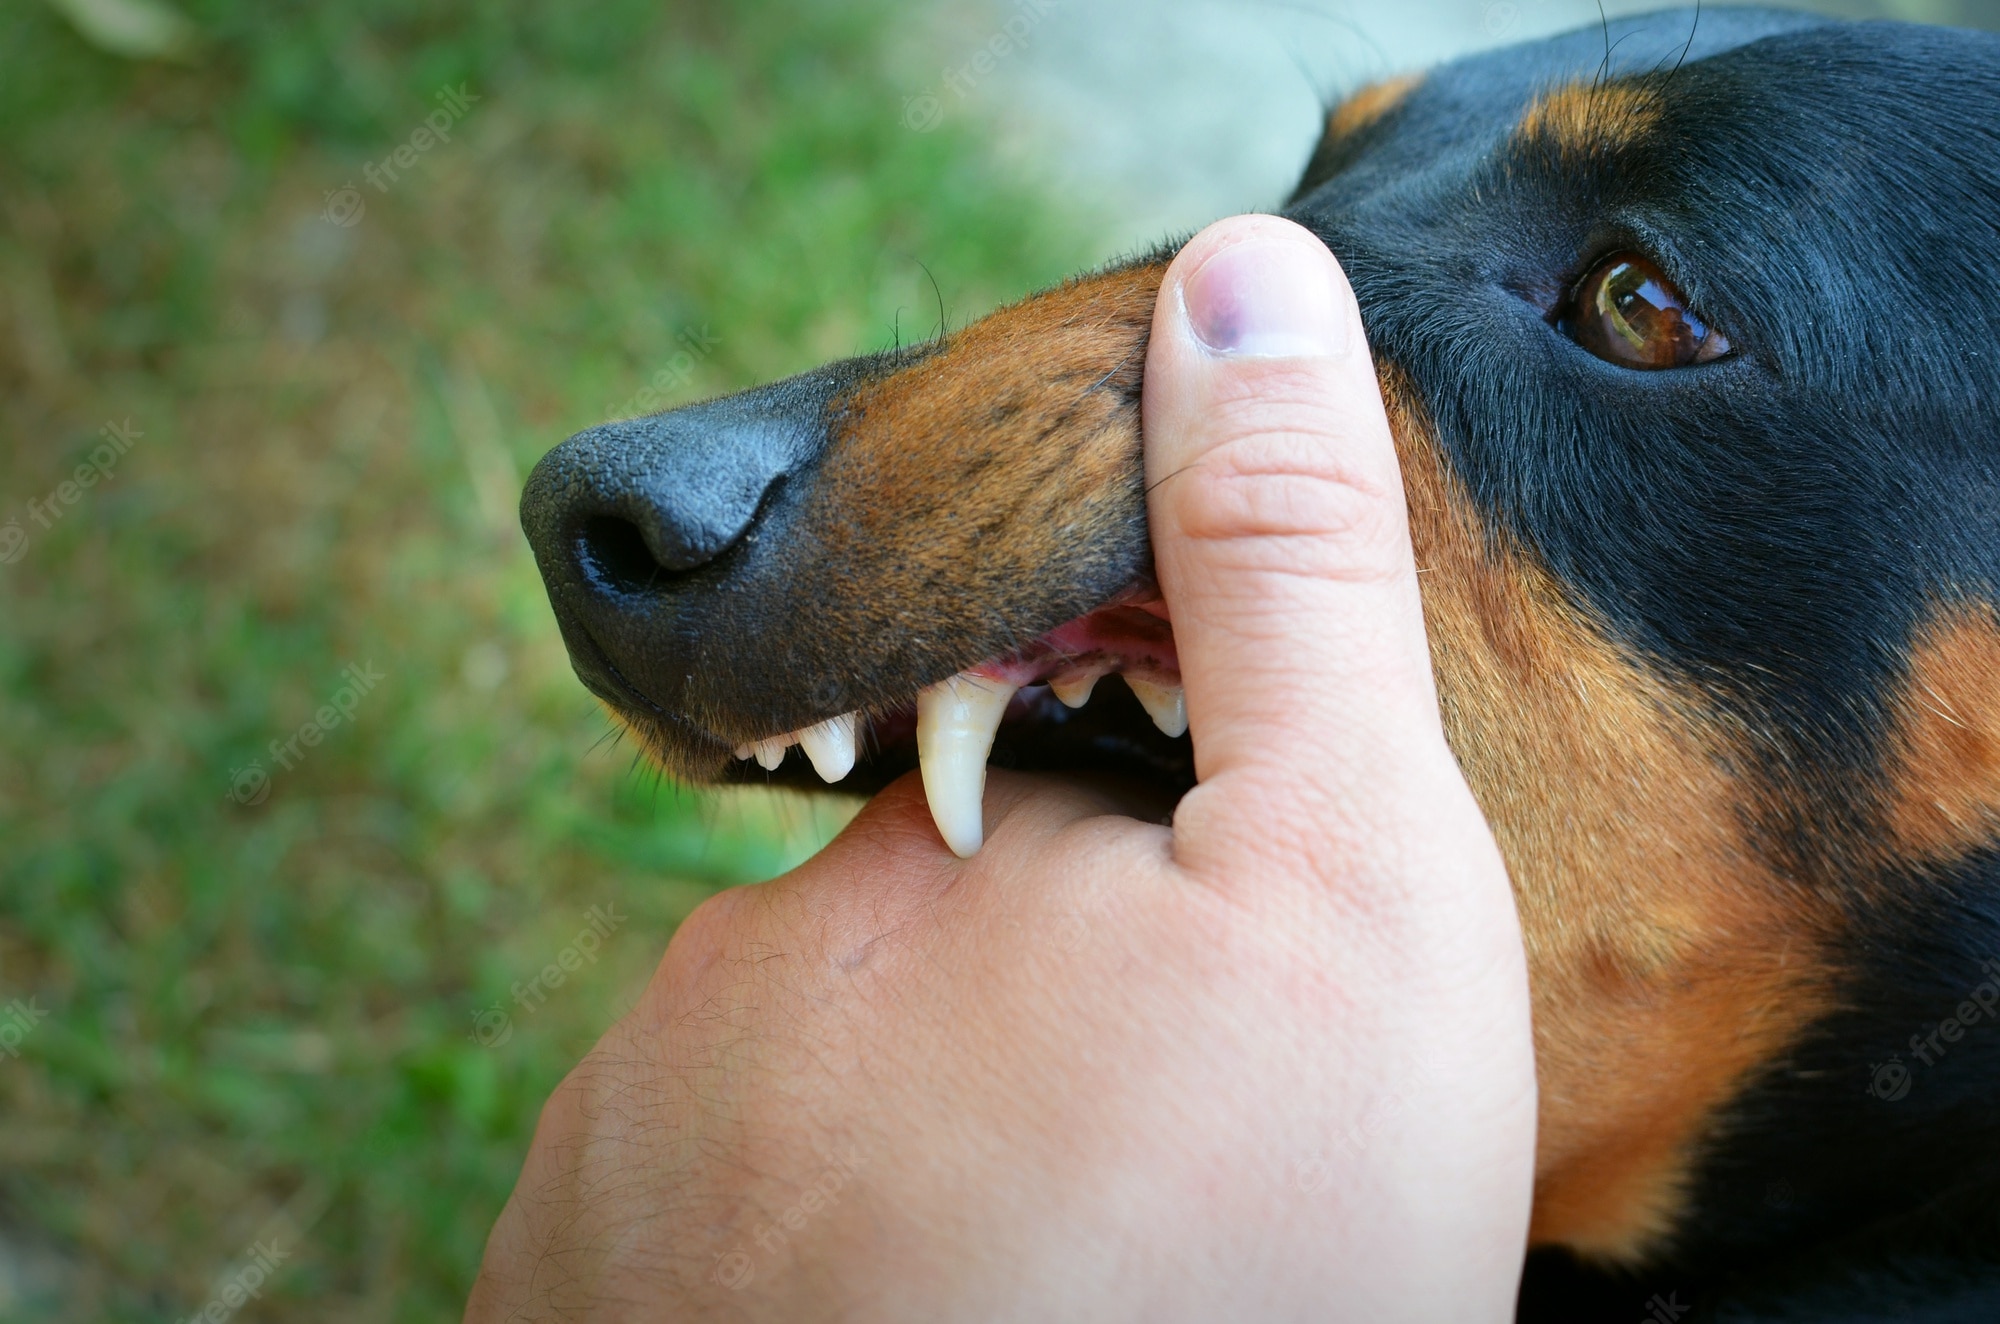 can a dog bite give you rabies